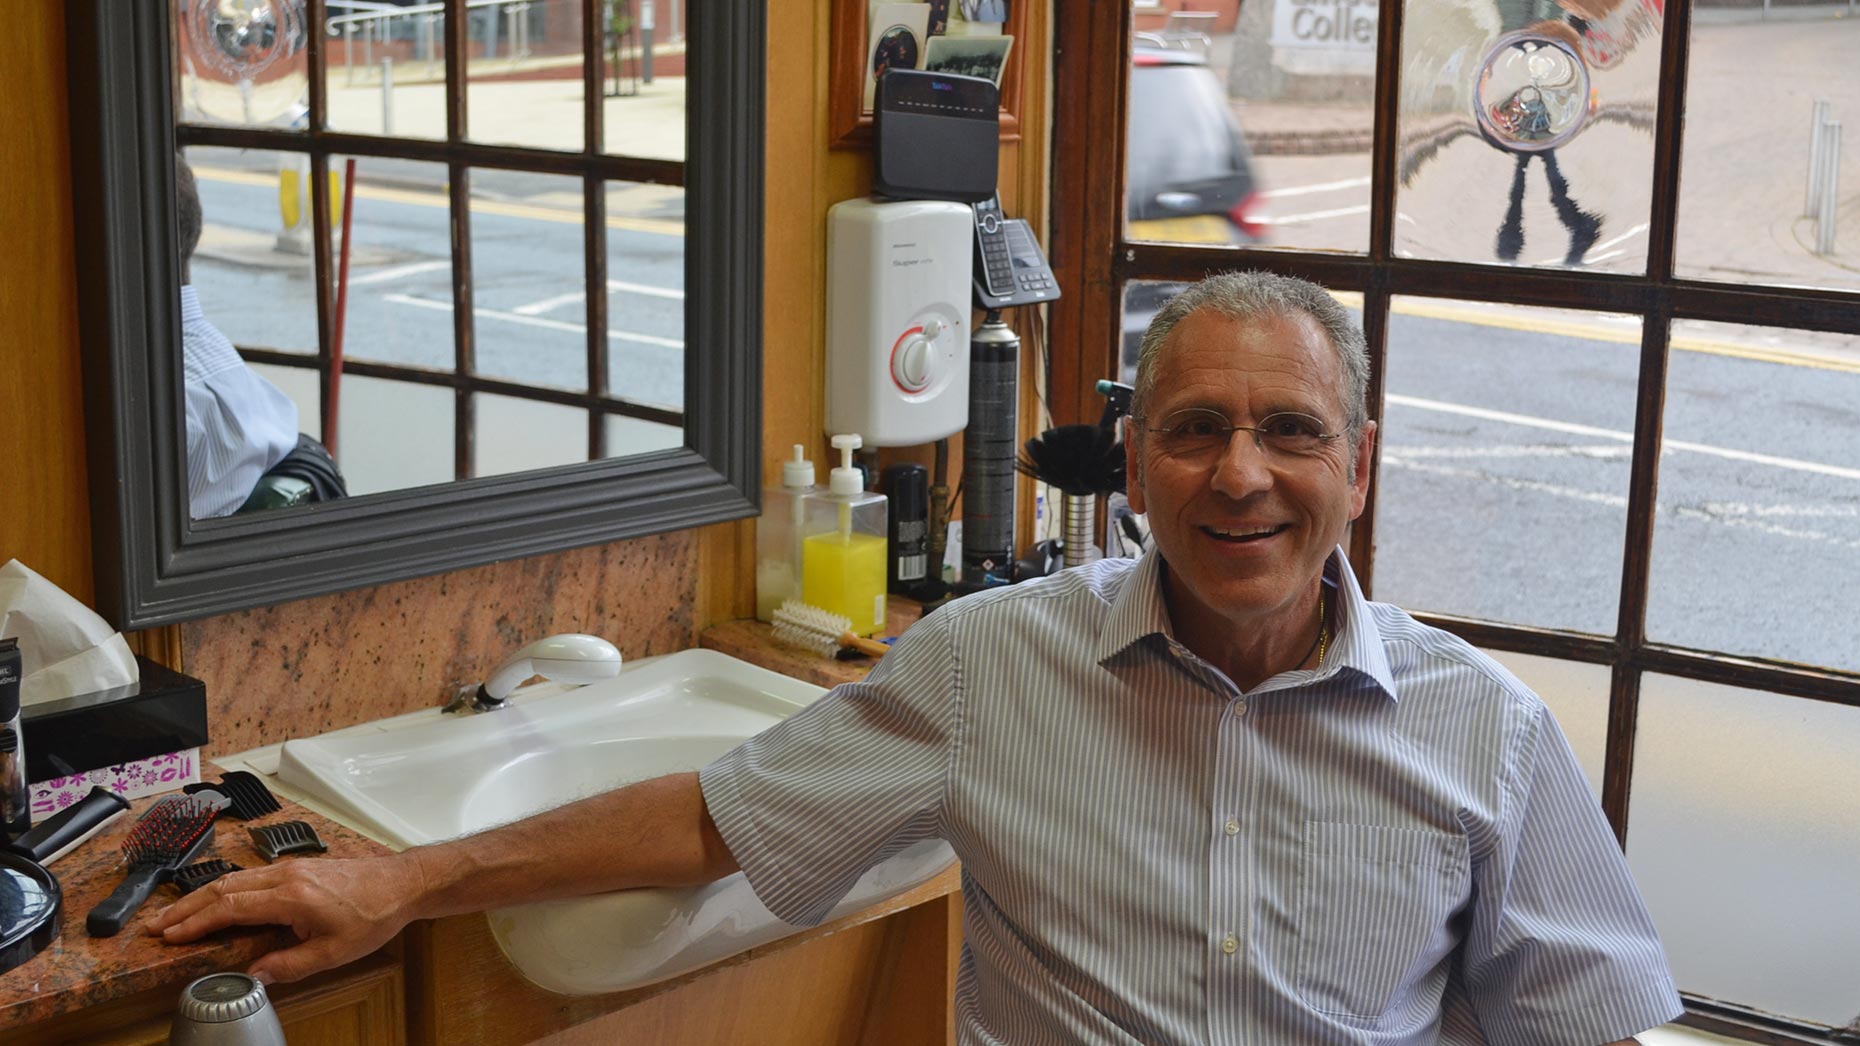 Gino Scumaci, owner of Hair by Gino. Photo: The Lincolnite